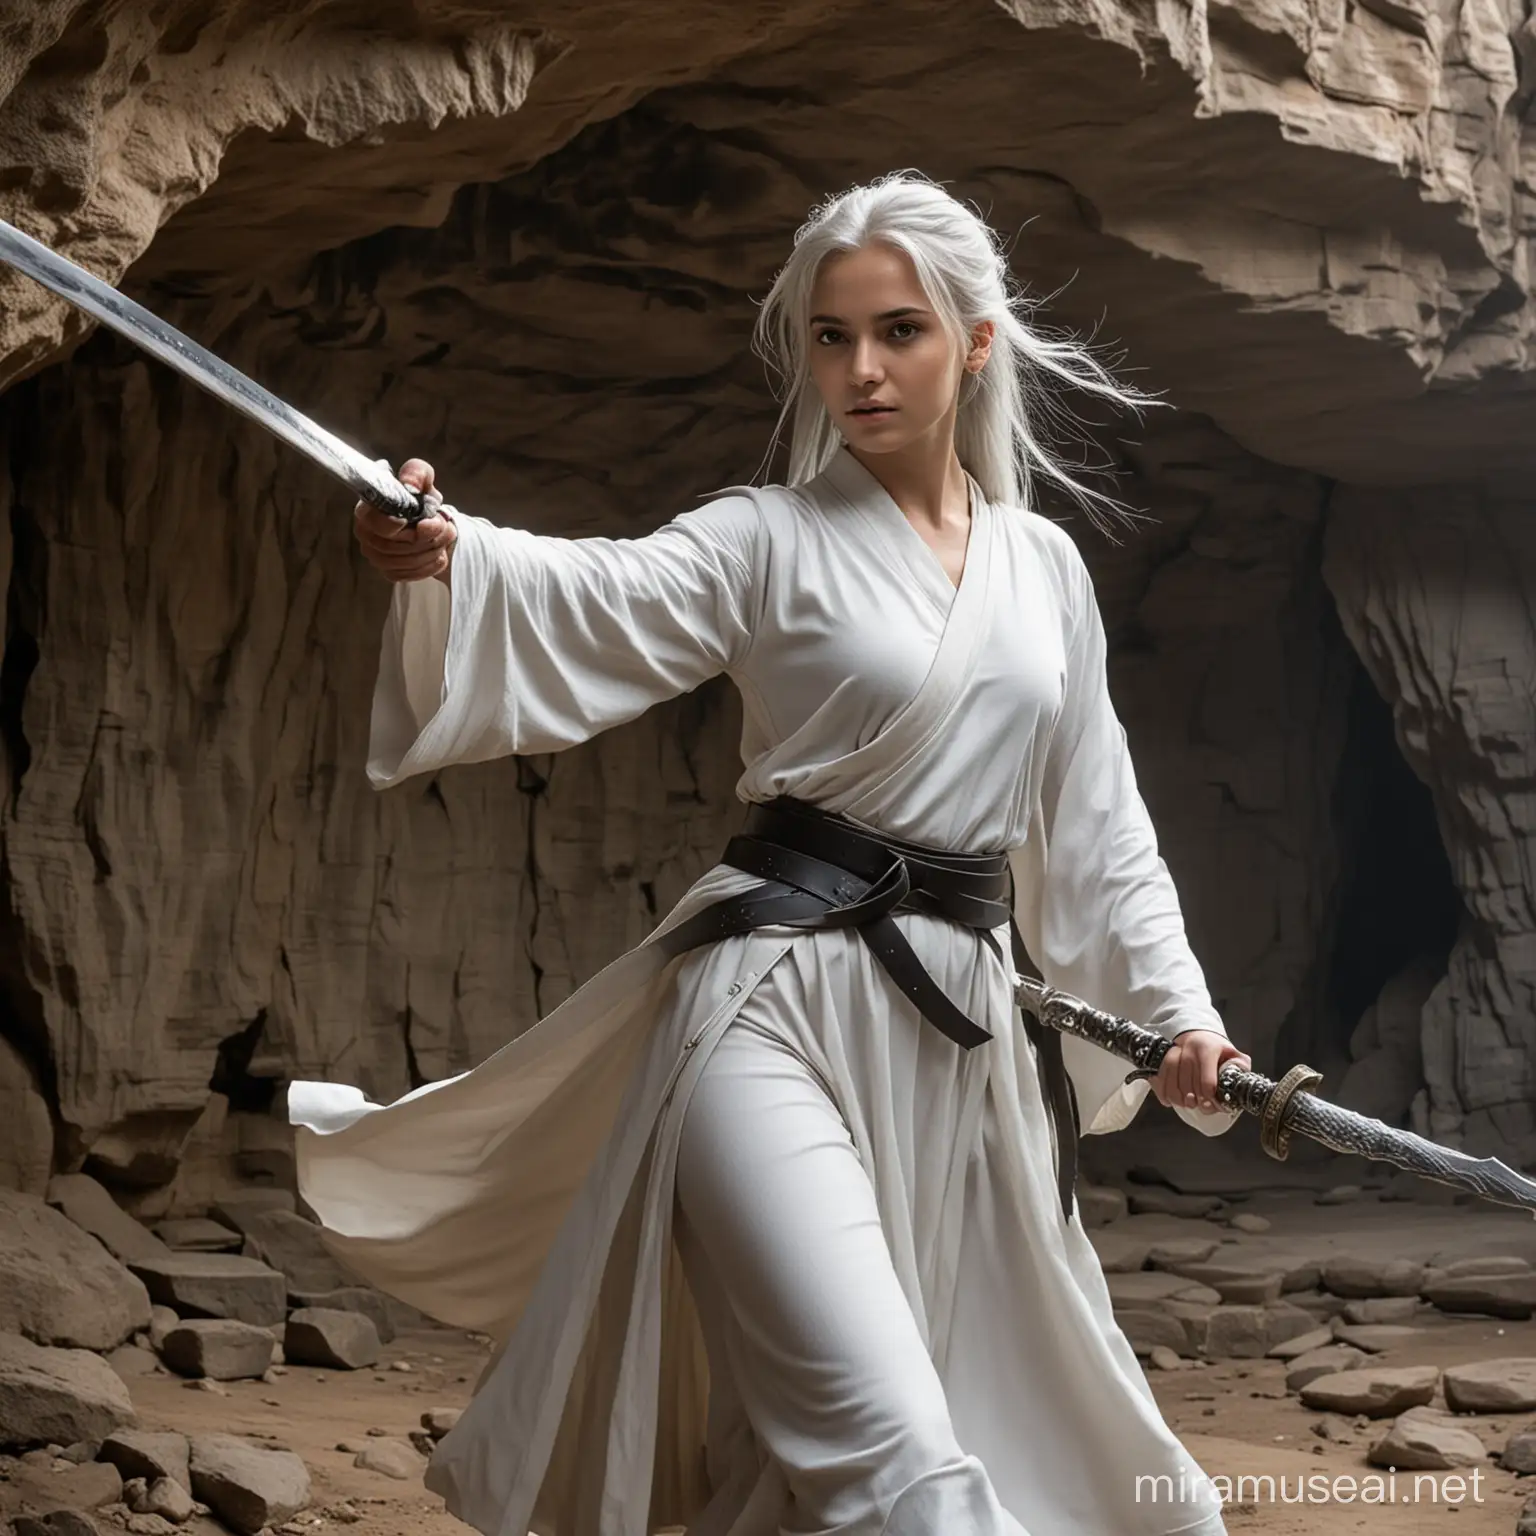 A young girl of 18 with silver hair that drapes to her shoulder. She had striking and calm grey eye. The young lady was wearing  a white tunic with a black leather belt. She was swinging a long silver blade while practicing her sword dance alone in a cave 